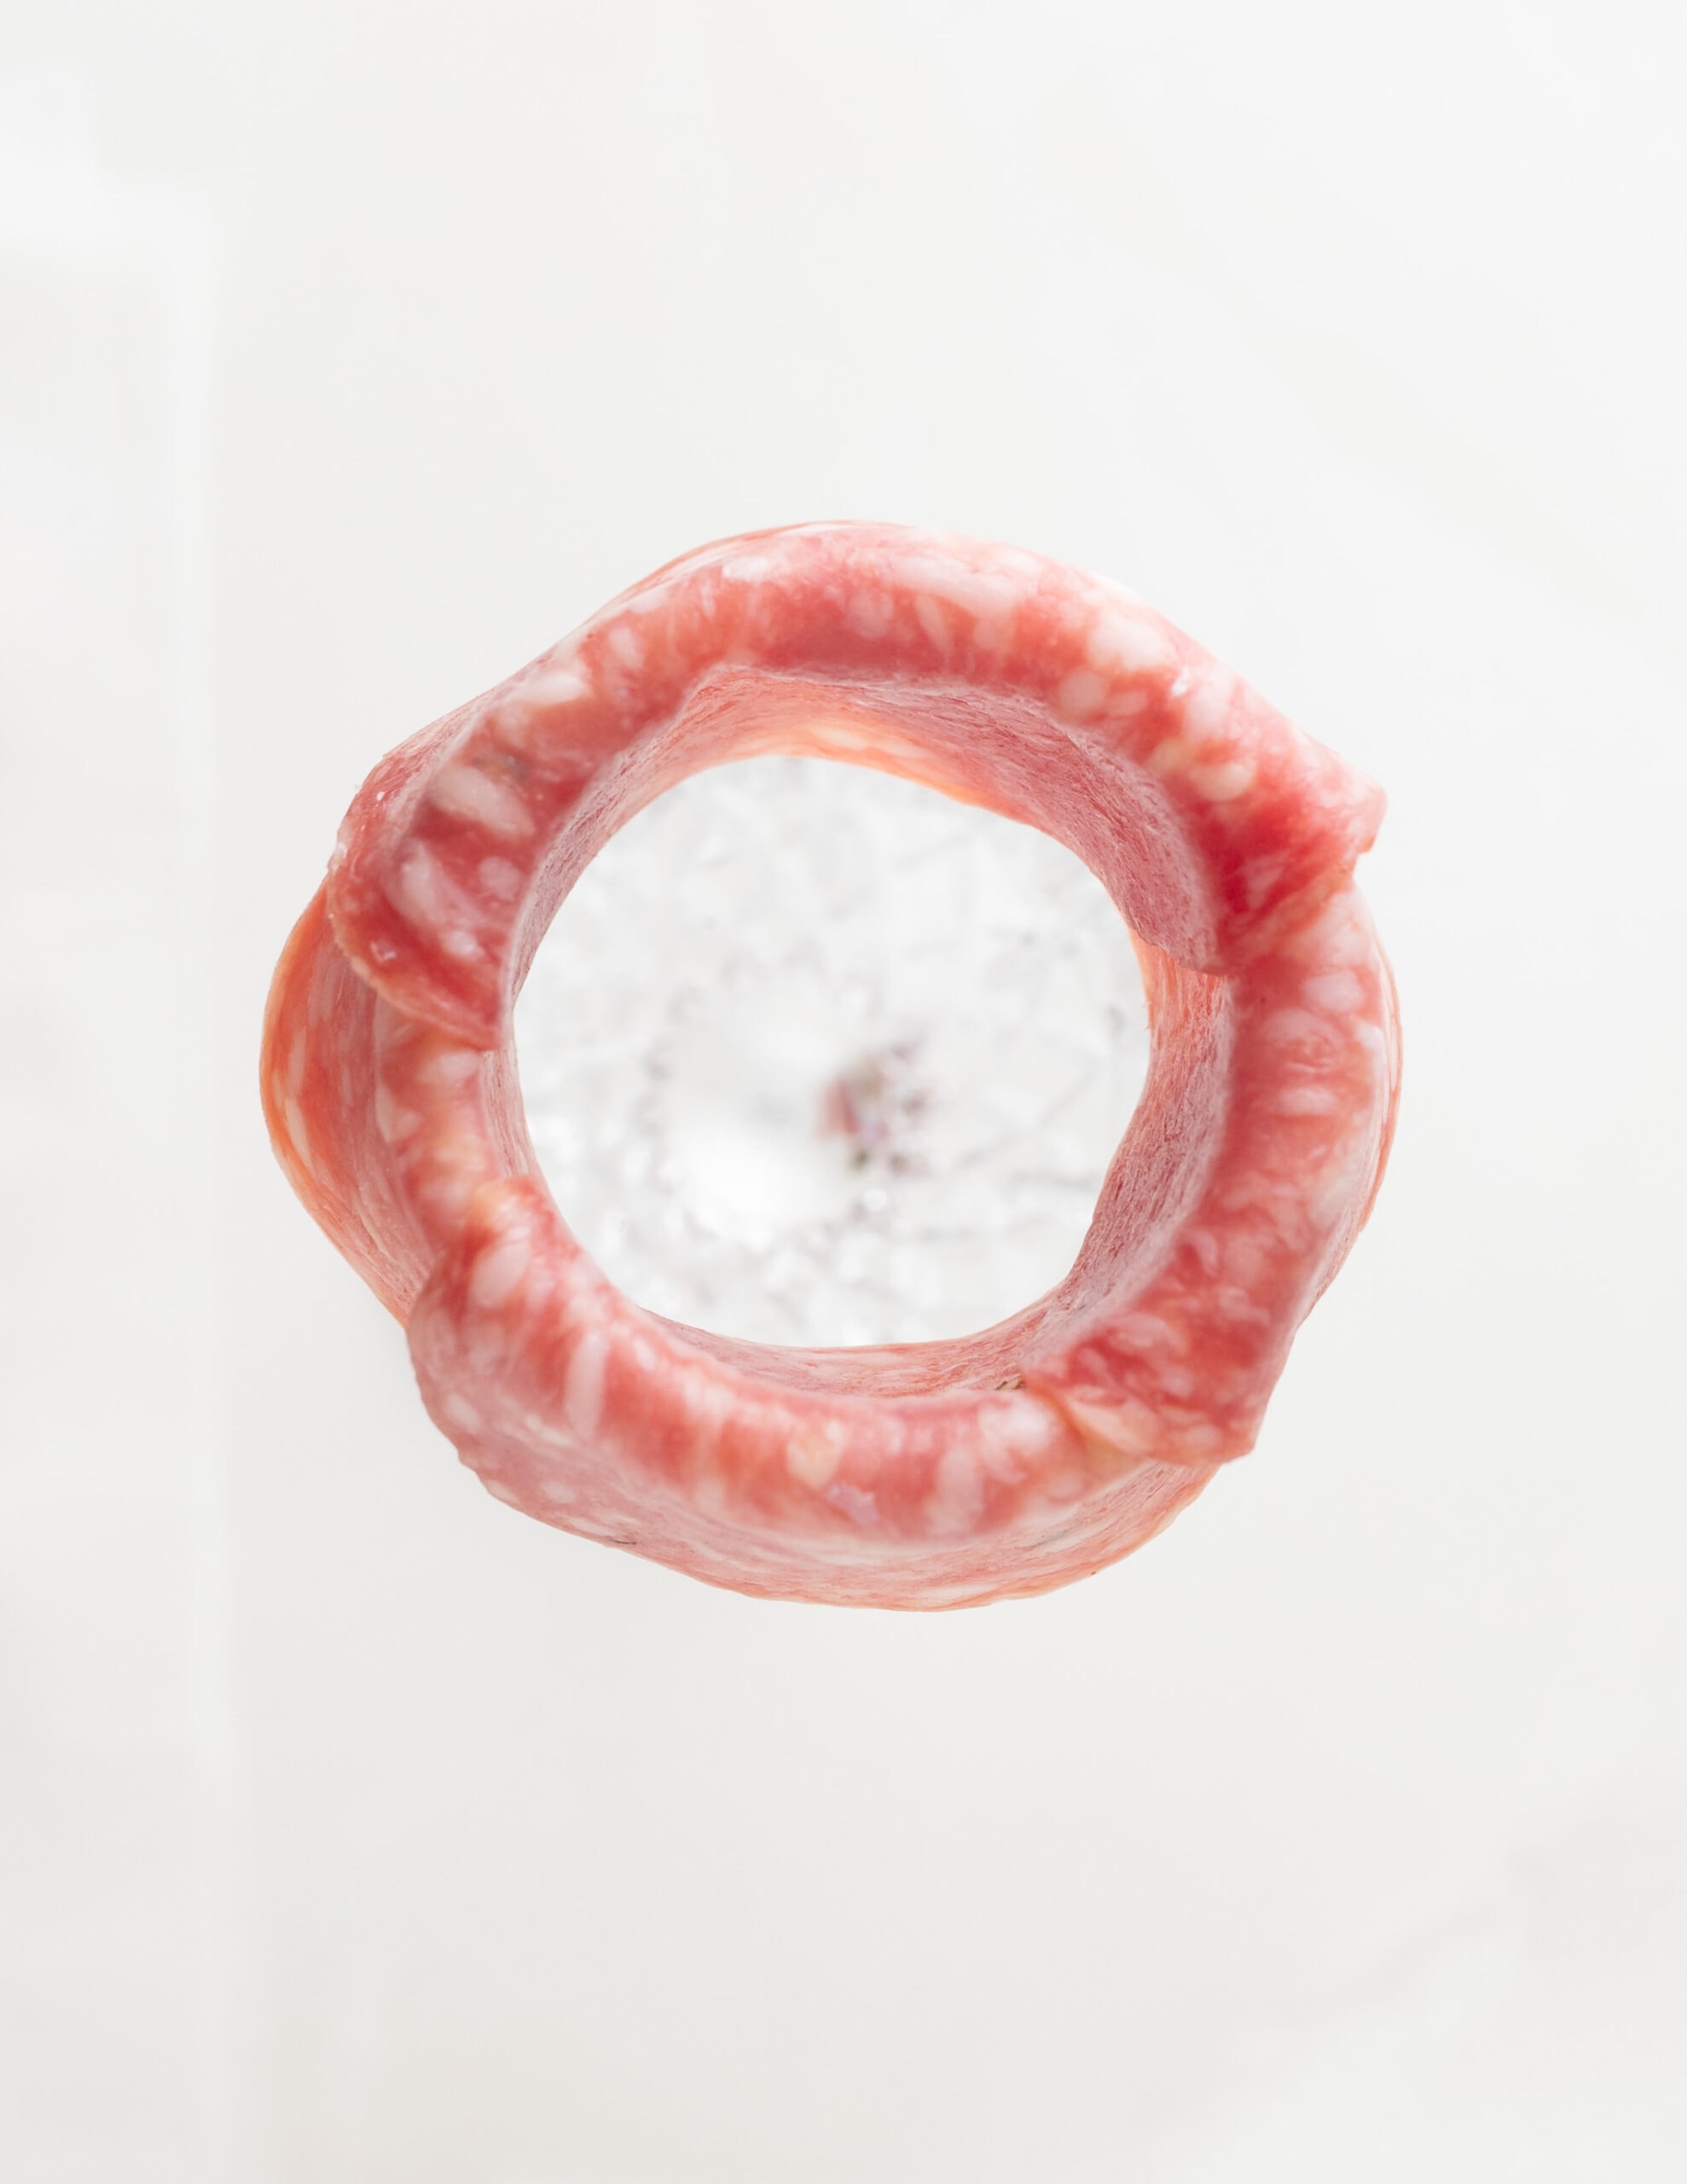 An aerial view on slice salami covering the rim of the champagne flute. 